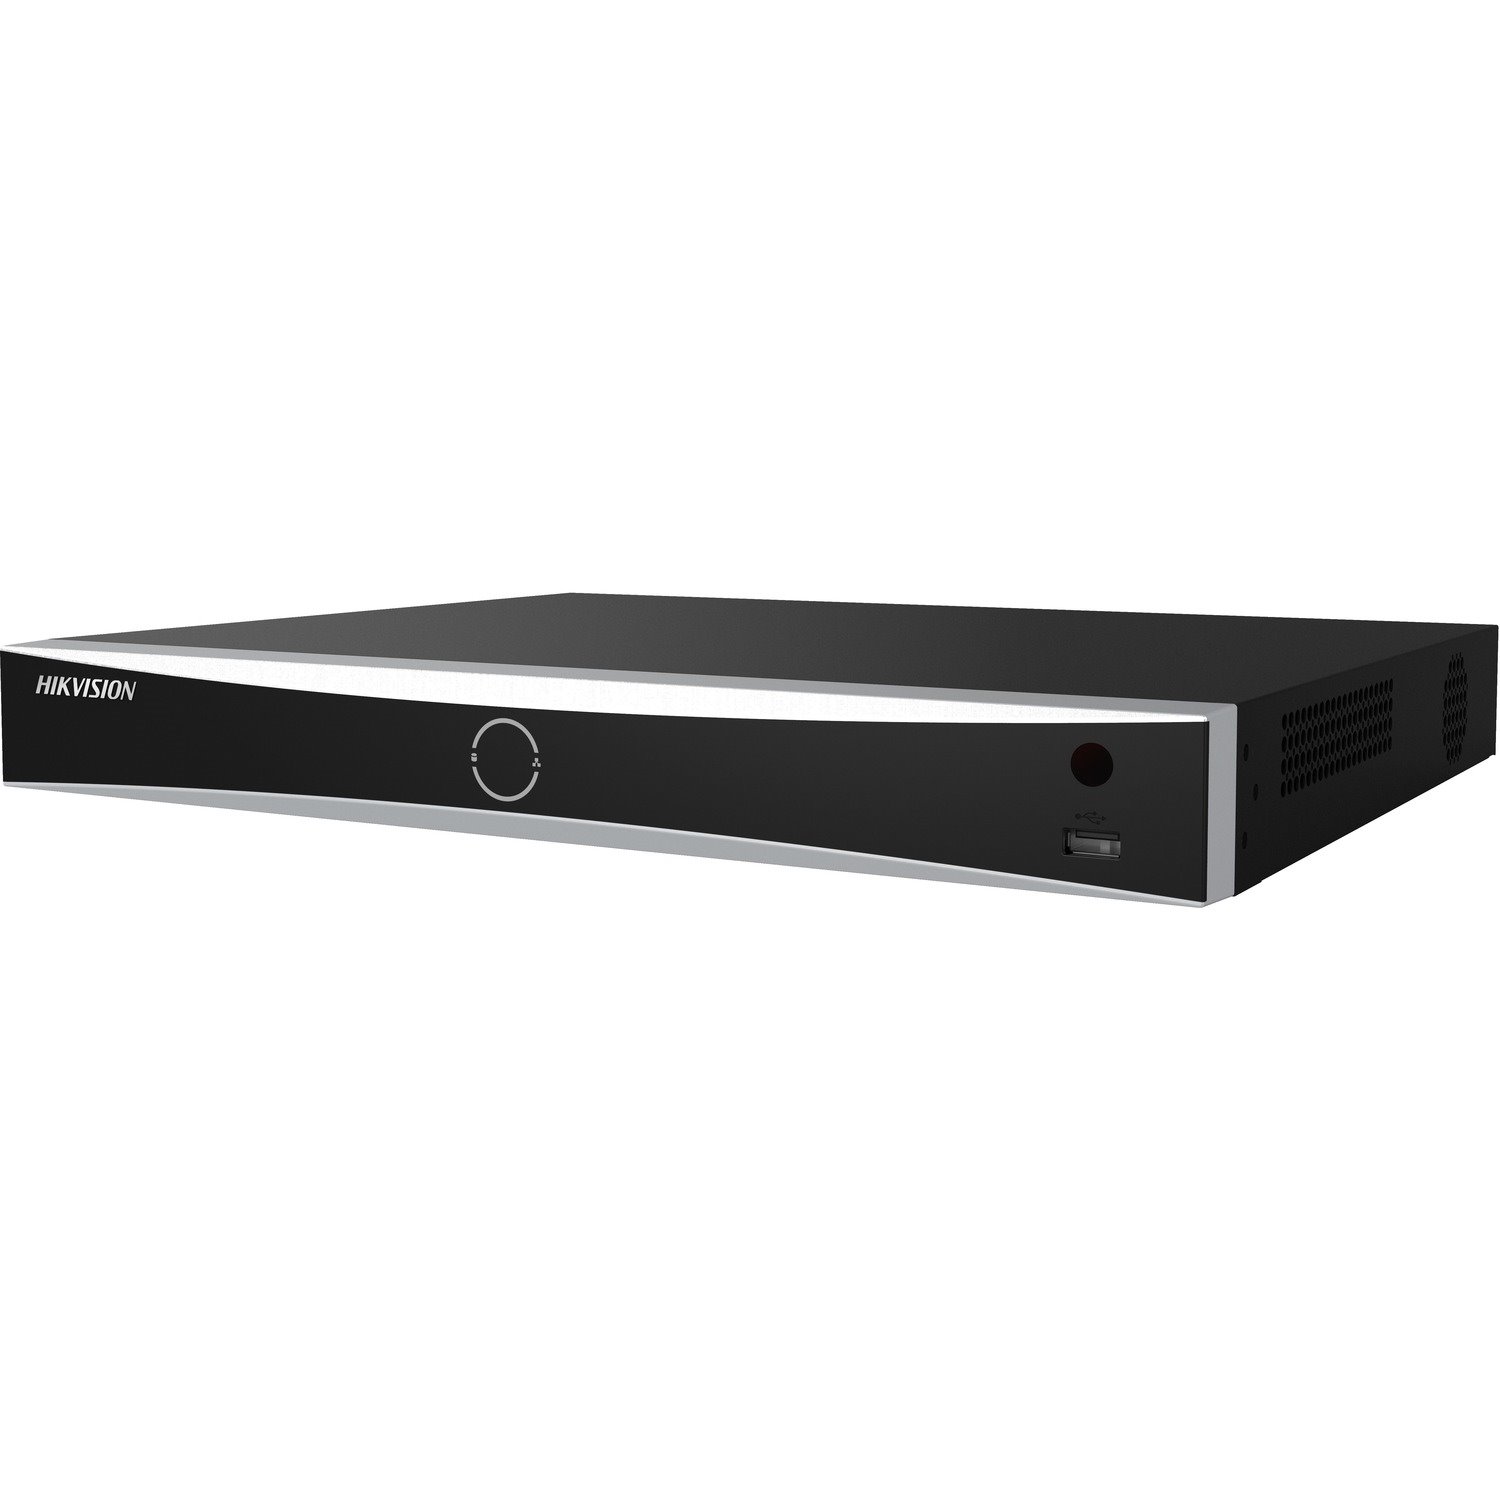 Hikvision 8-channel Plug and Play Network Video Recorder with AcuSense - 2 TB HDD